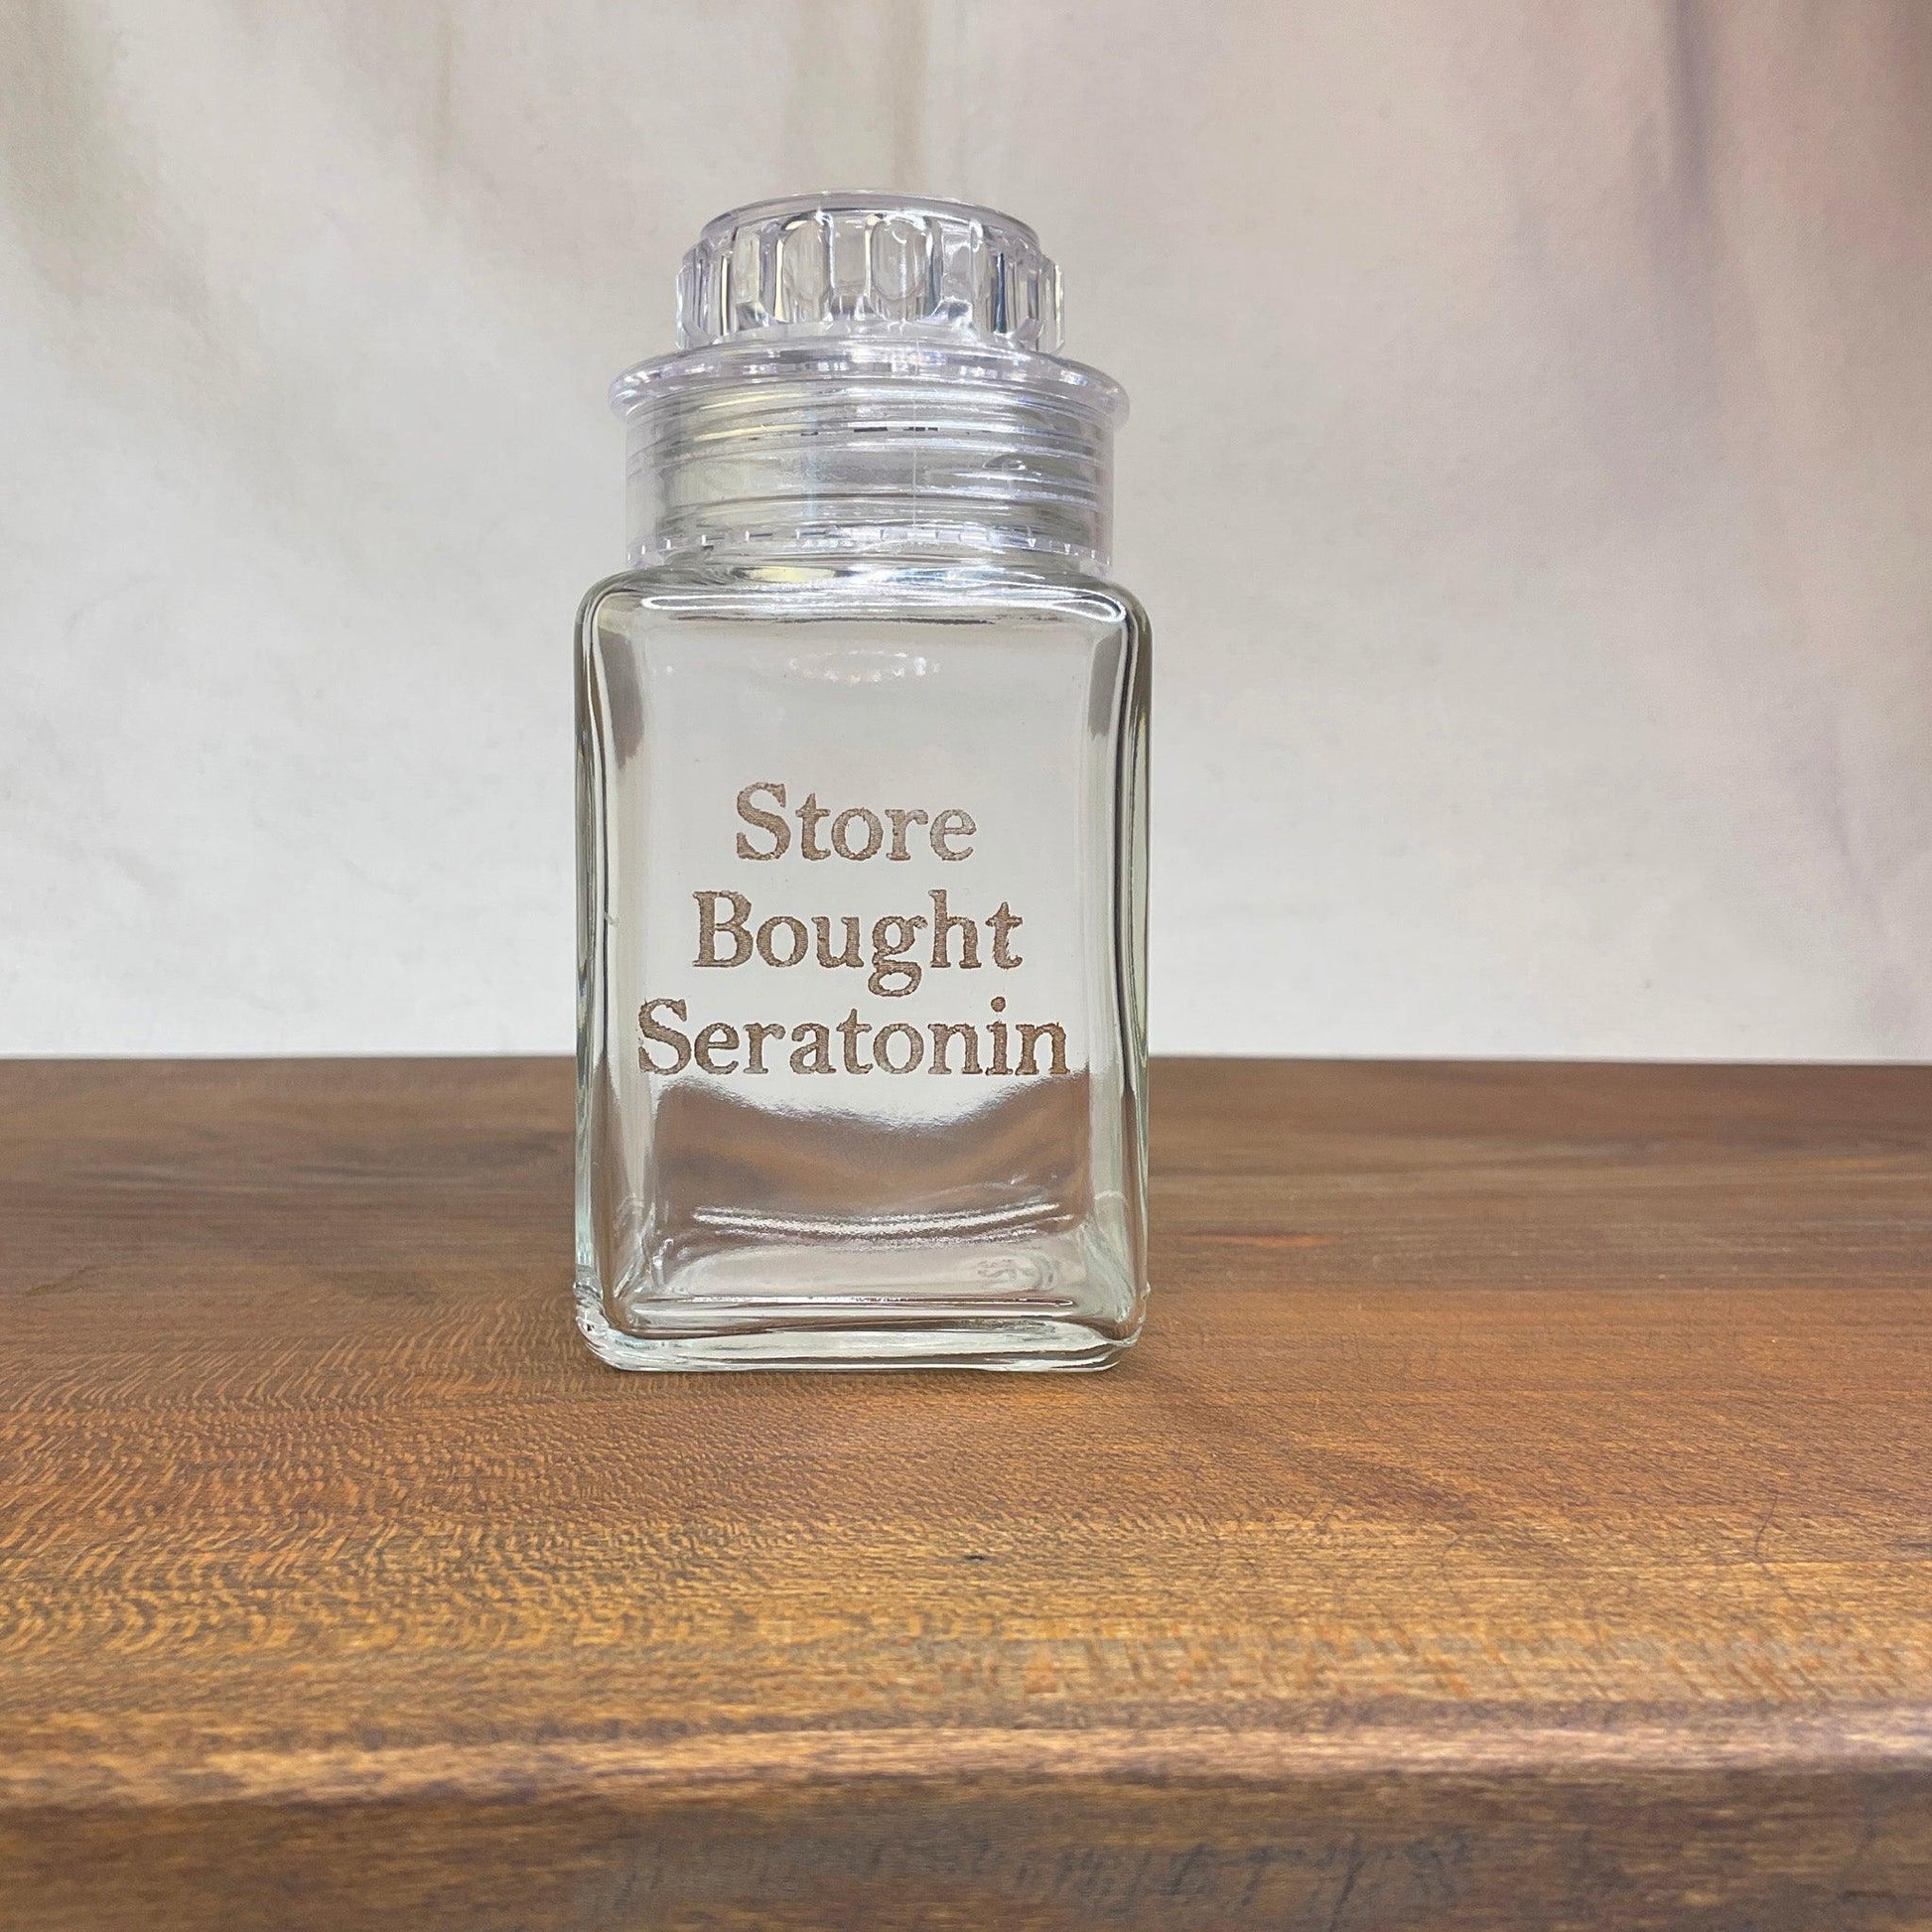 Store Bought Serotonin Apothecary Jar, Economy Size! - Offensively Domestic